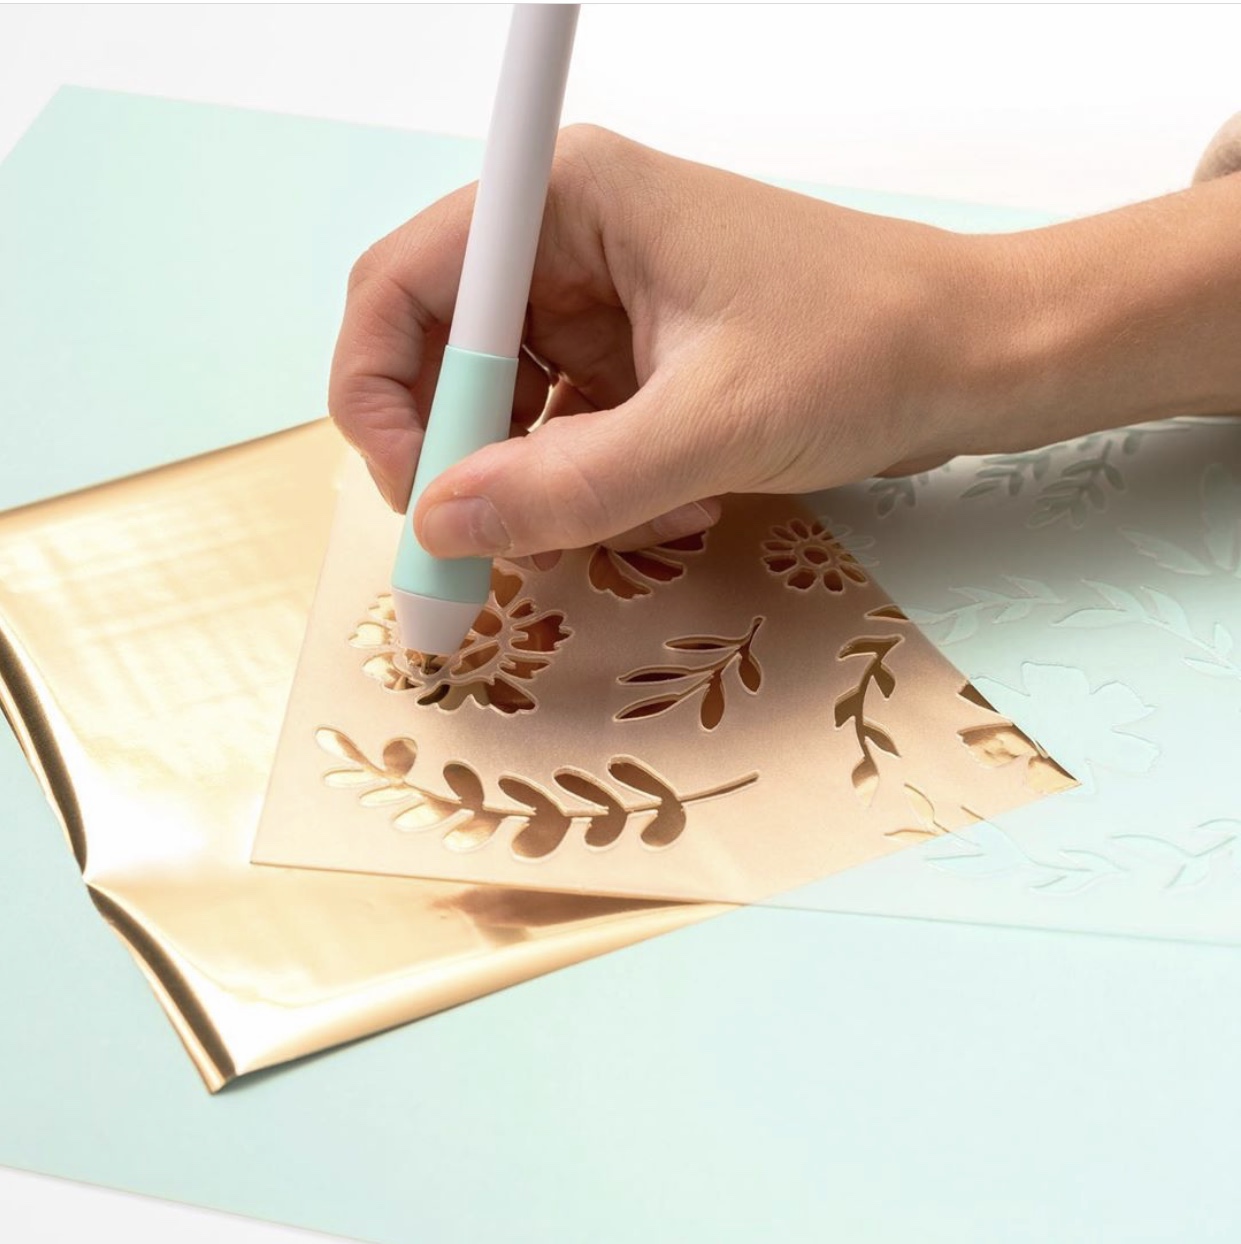 How to Use Foil Quill Freehand Pens and Magnetic Mat Together - Silhouette  School